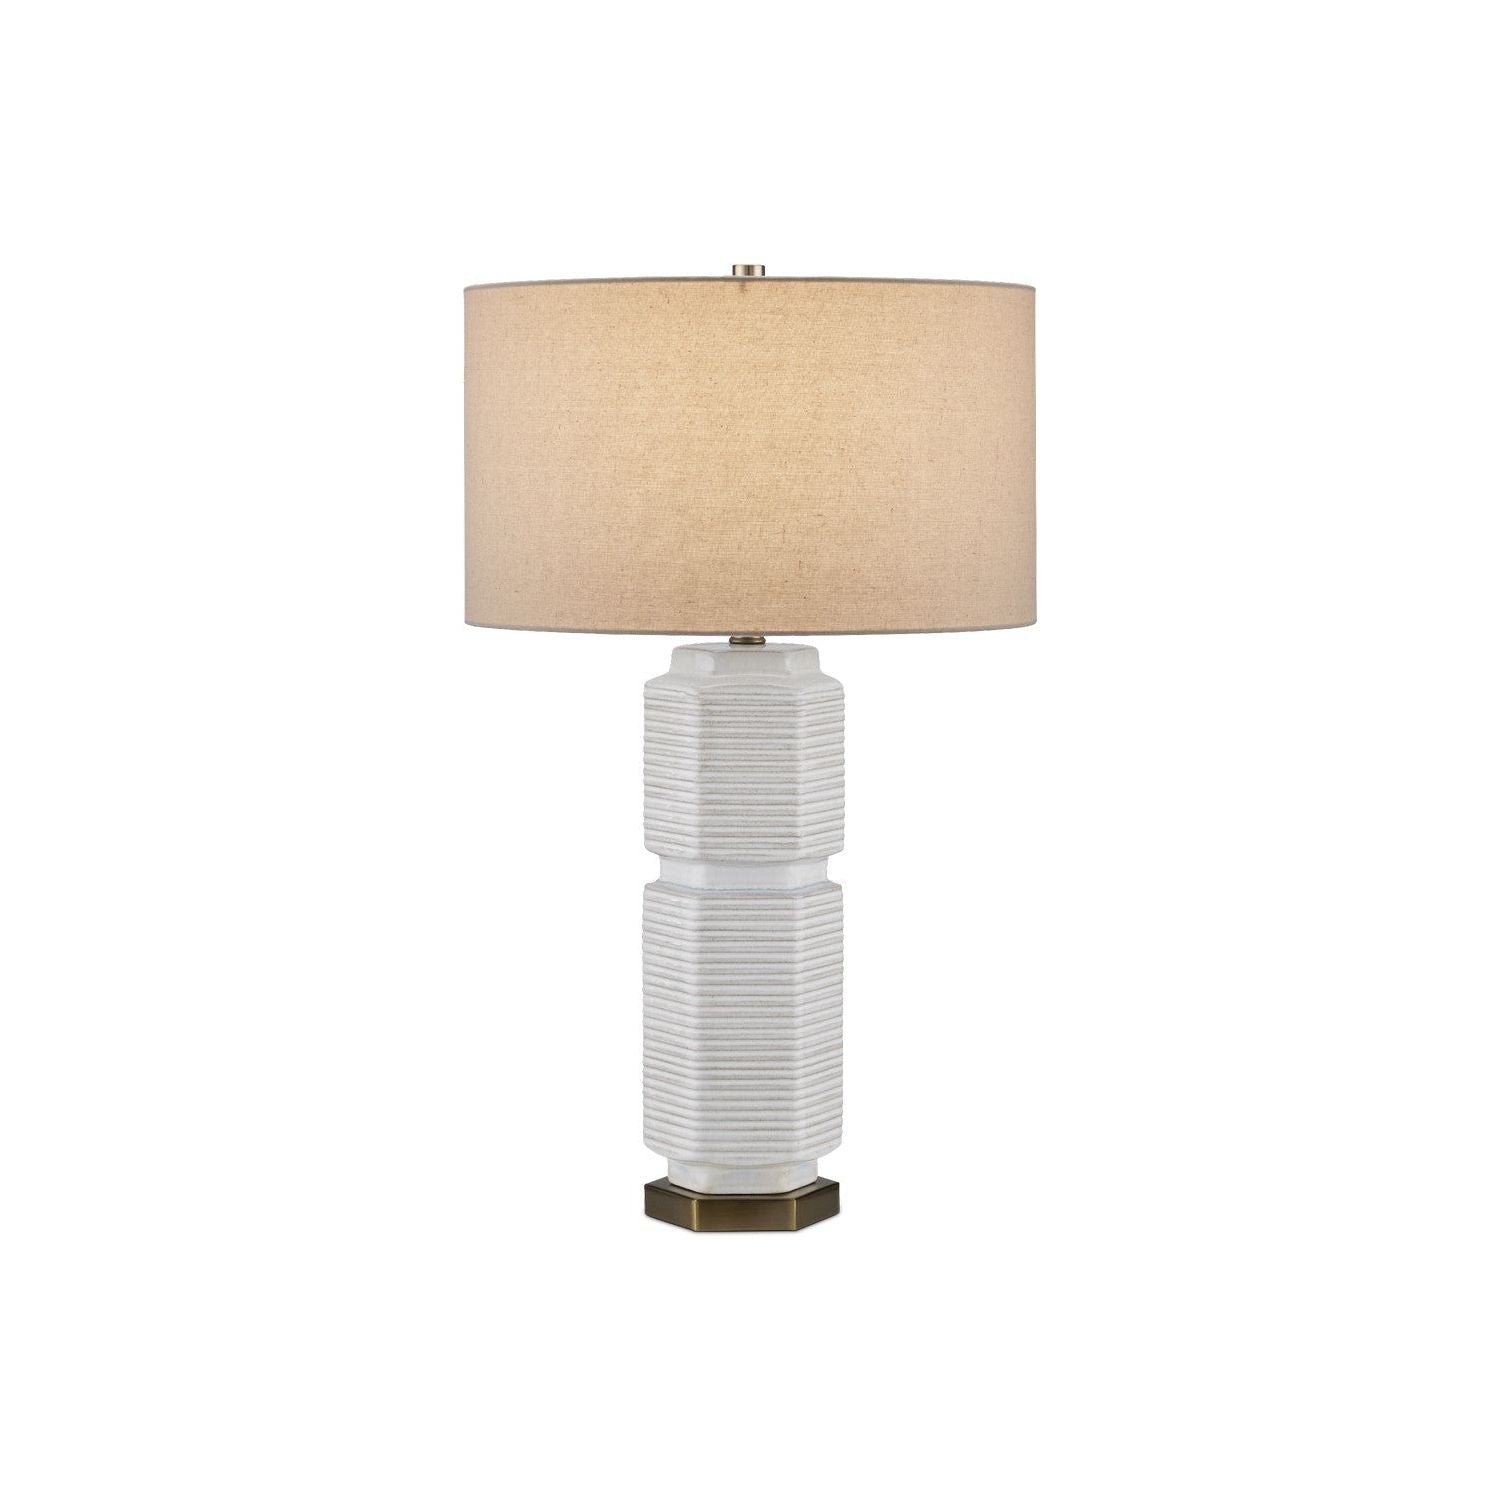 Currey and Company - 6000-0965 - One Light Table Lamp - White/Beige/Blue/Antique Brass